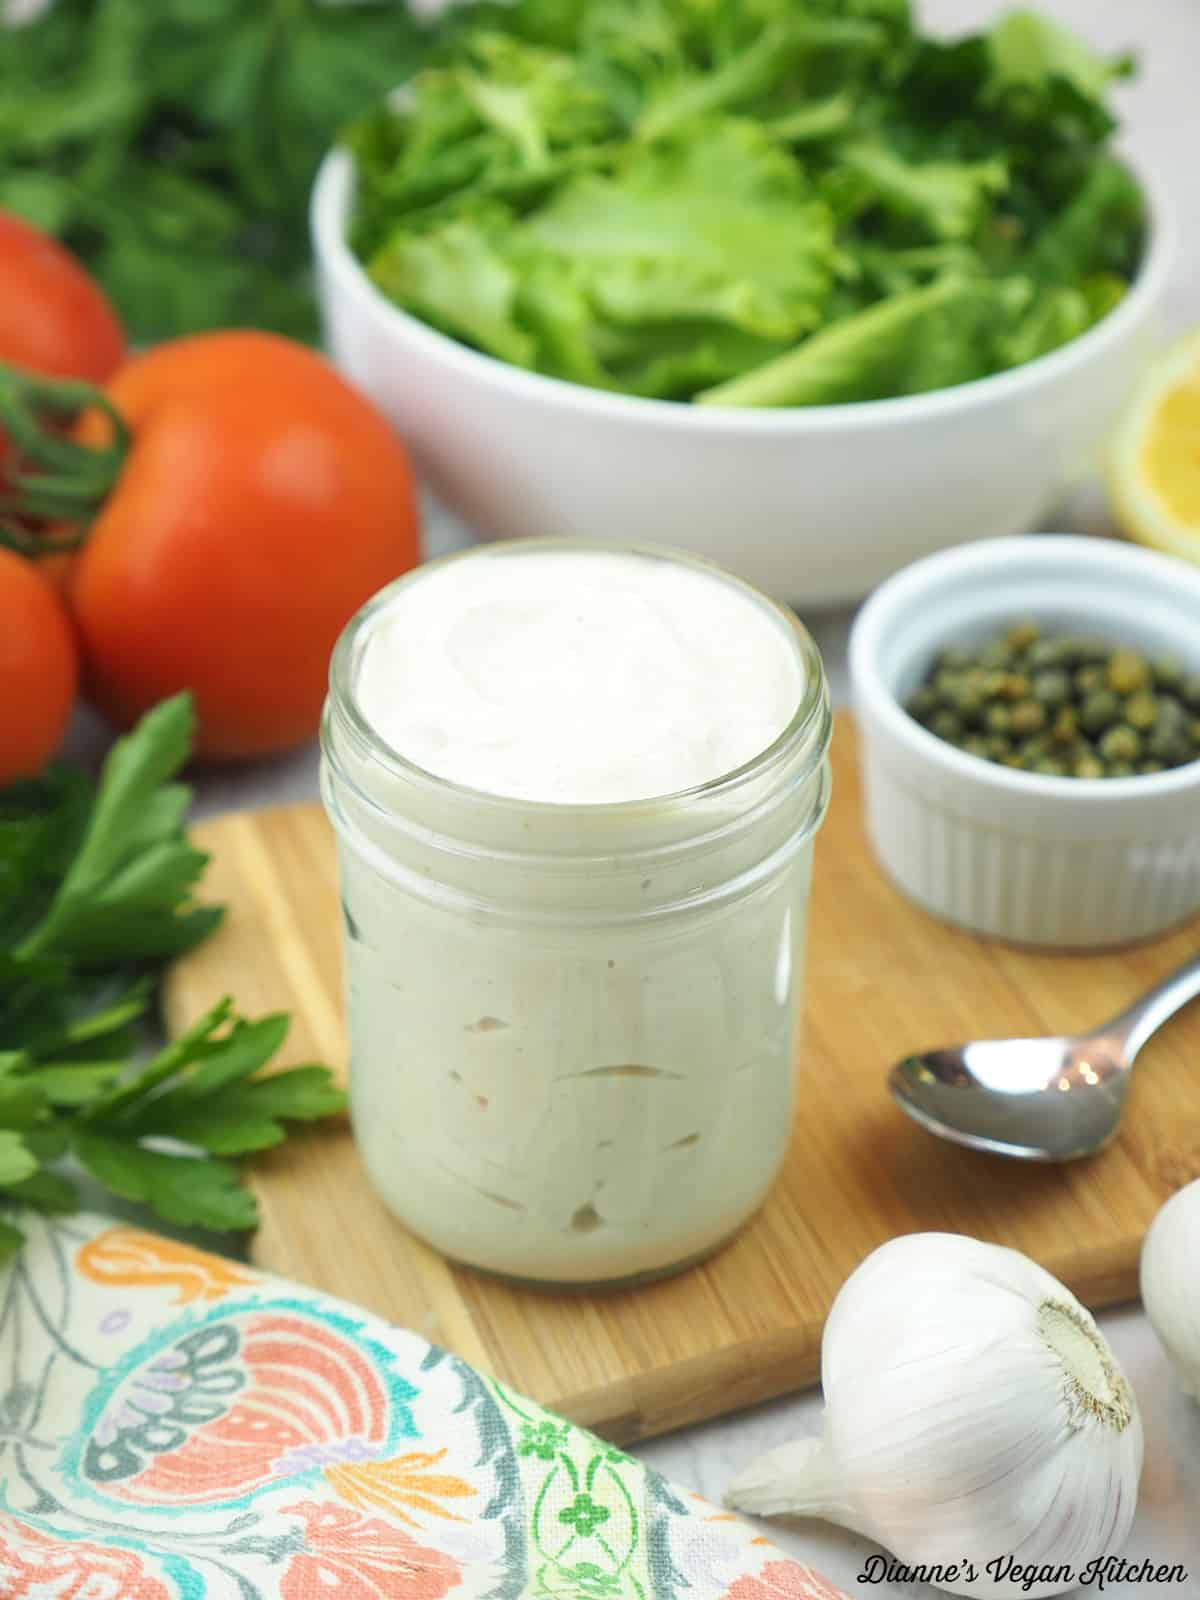 caesar salad dressing with salad, lemon, spoon, capers, and tomatoes